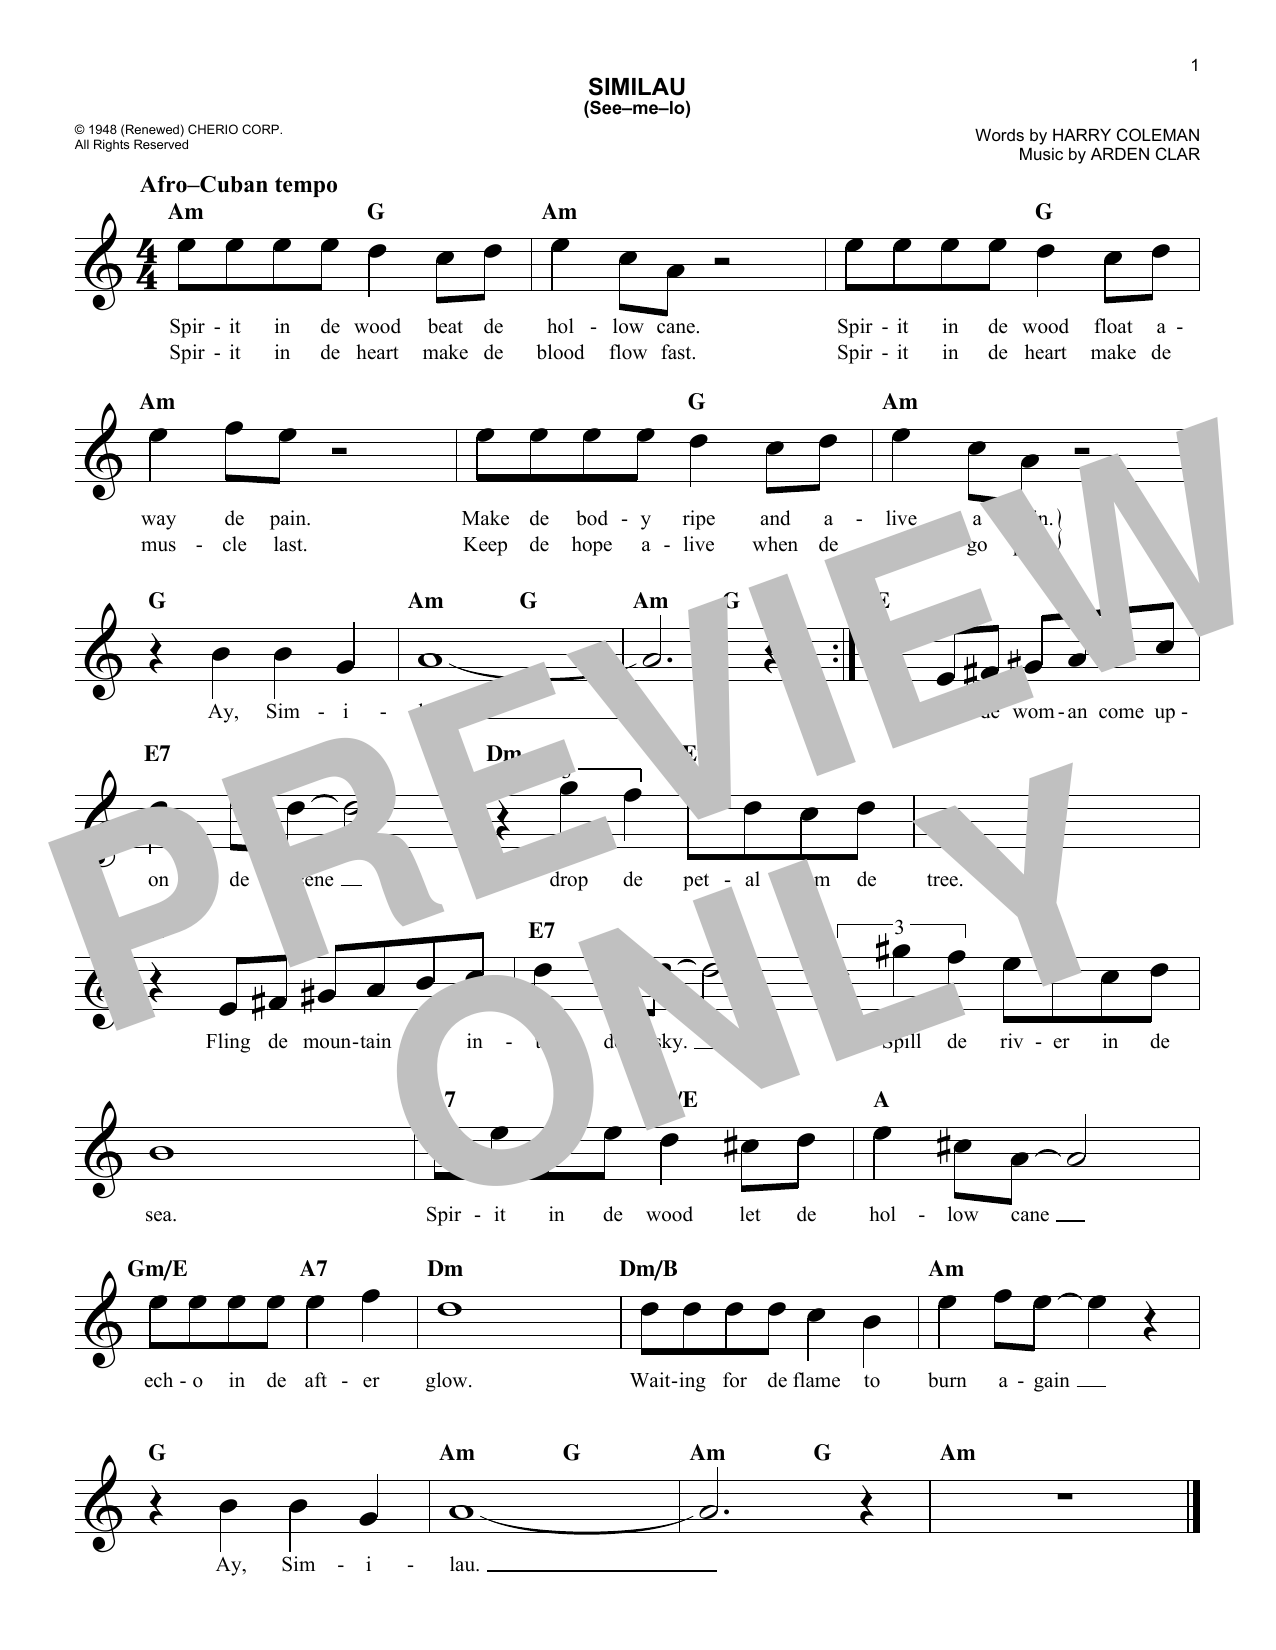 Download Harry Coleman Similau (See-me-lo) Sheet Music